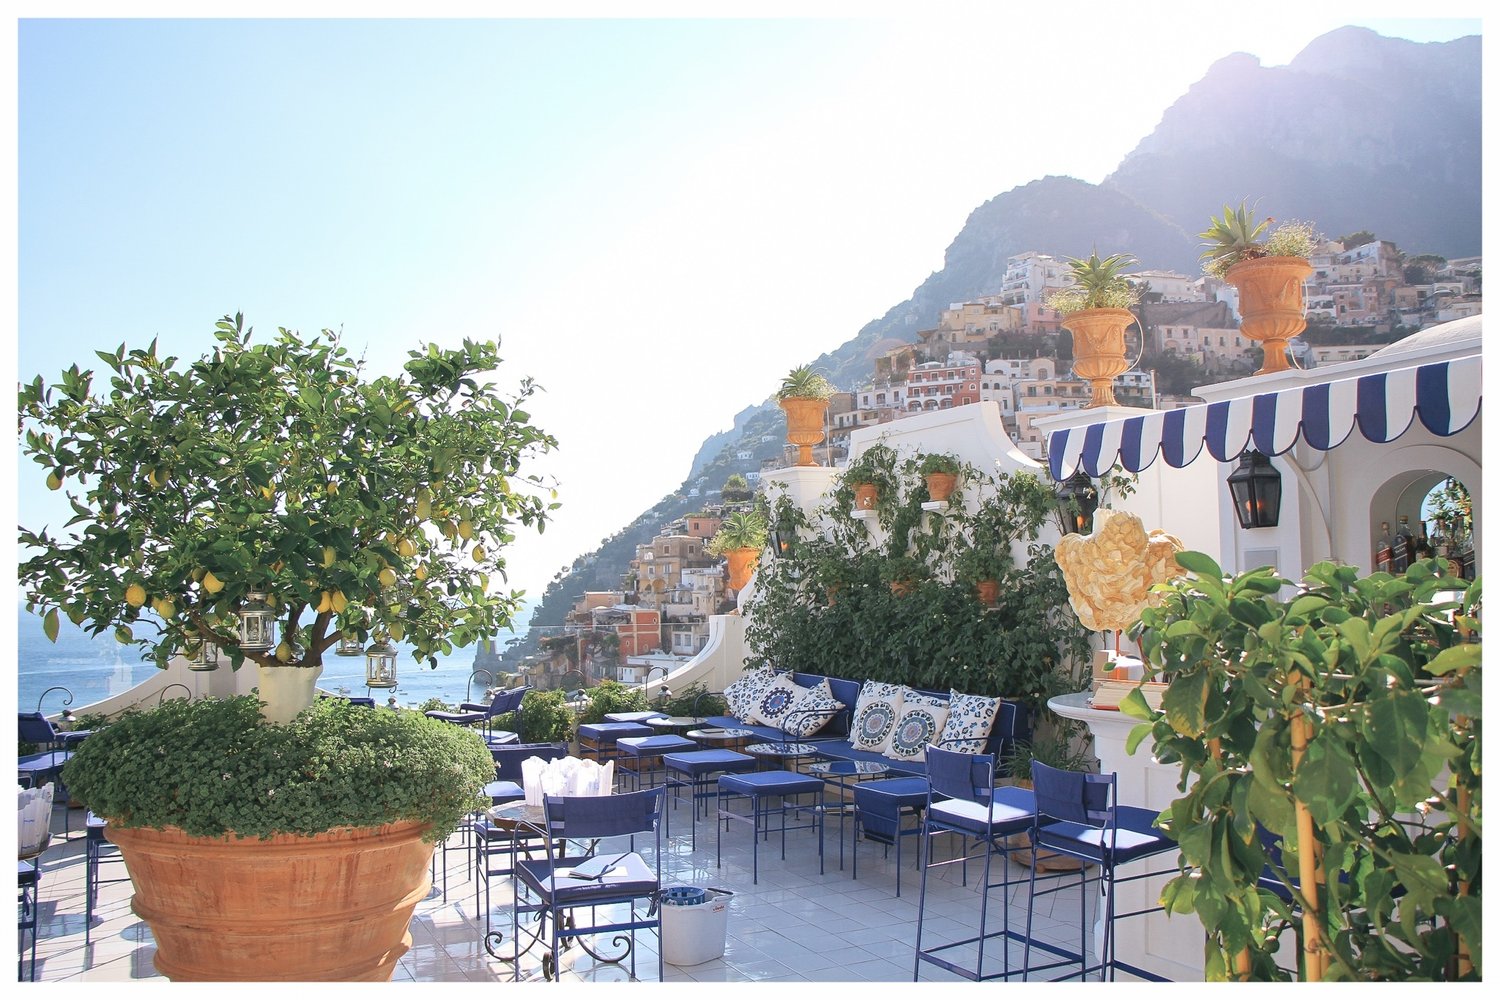 My Complete Guide to the Best of Positano, Italy - Journal | Monica ...